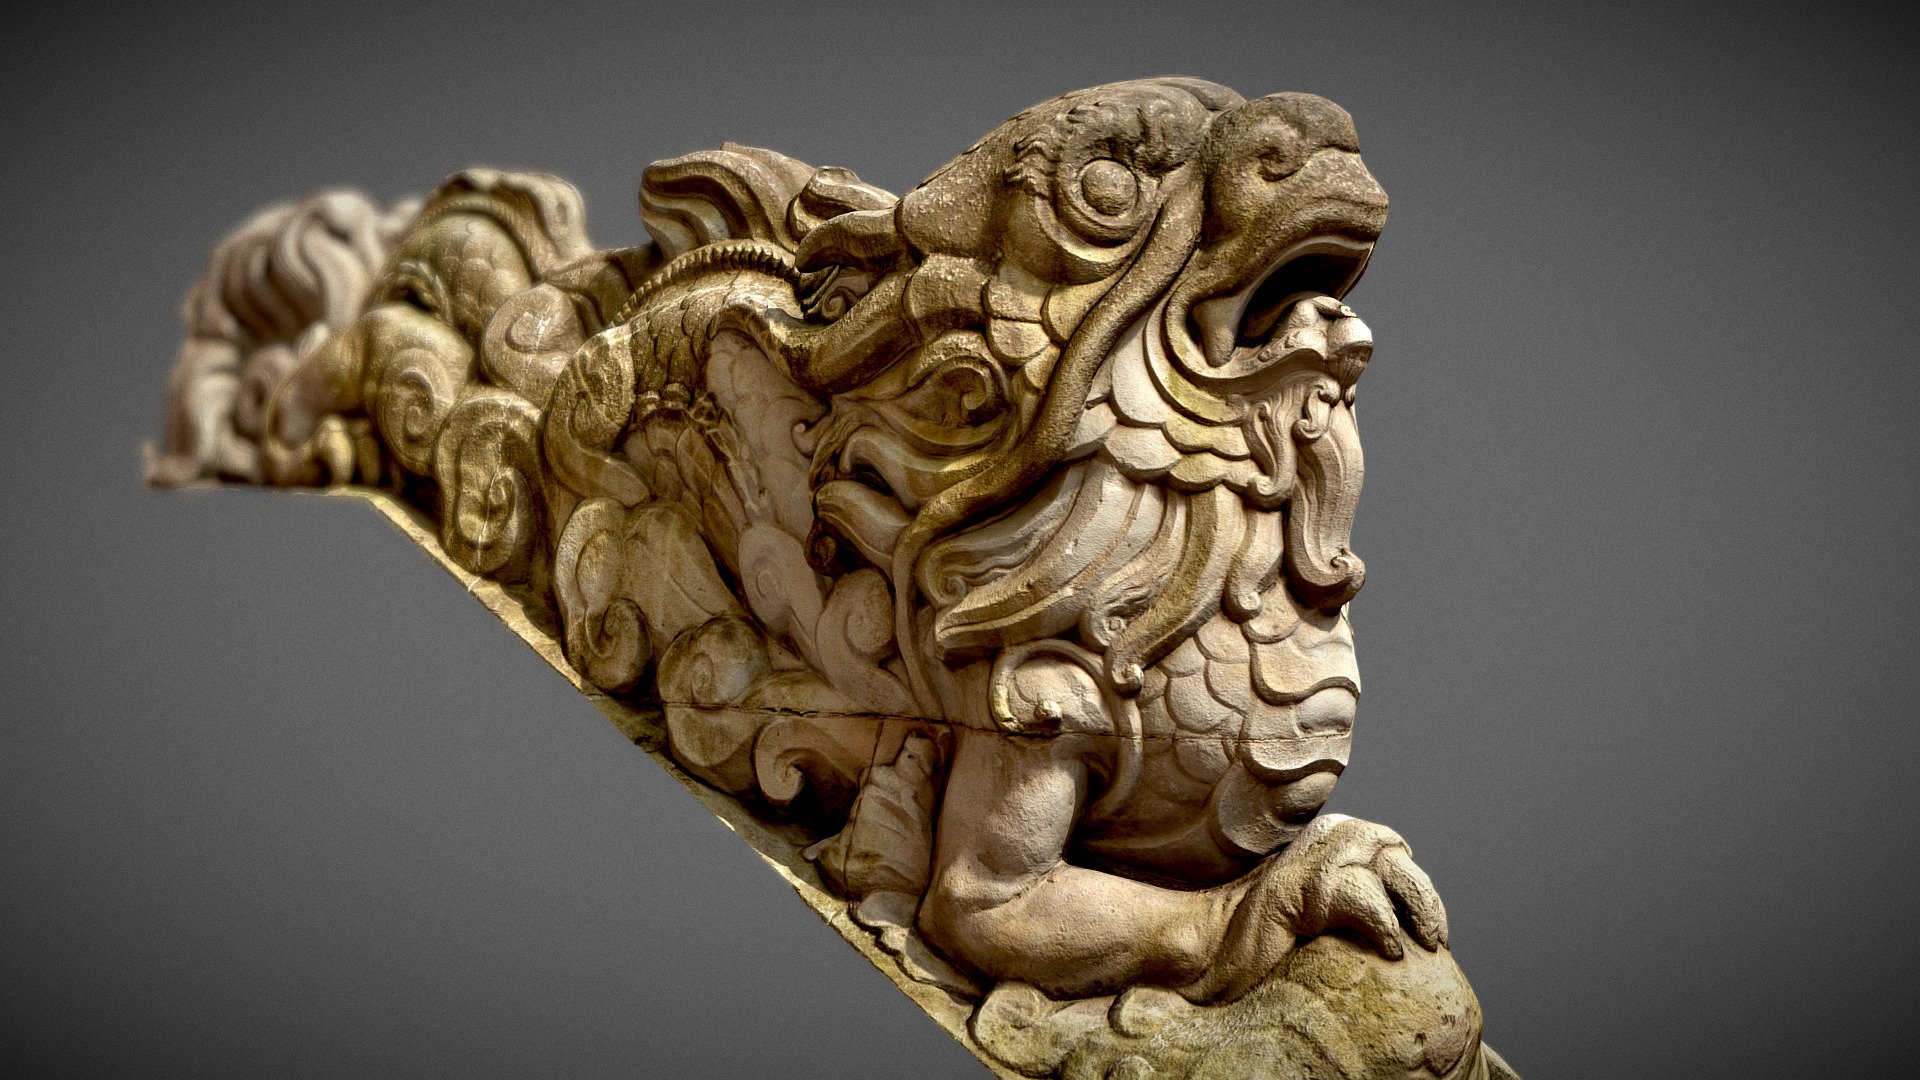 Photogrammetry scan of a Chinese dragon sculpture based on stairs. 
Fully retopo and pbr texturing 4K 3d model